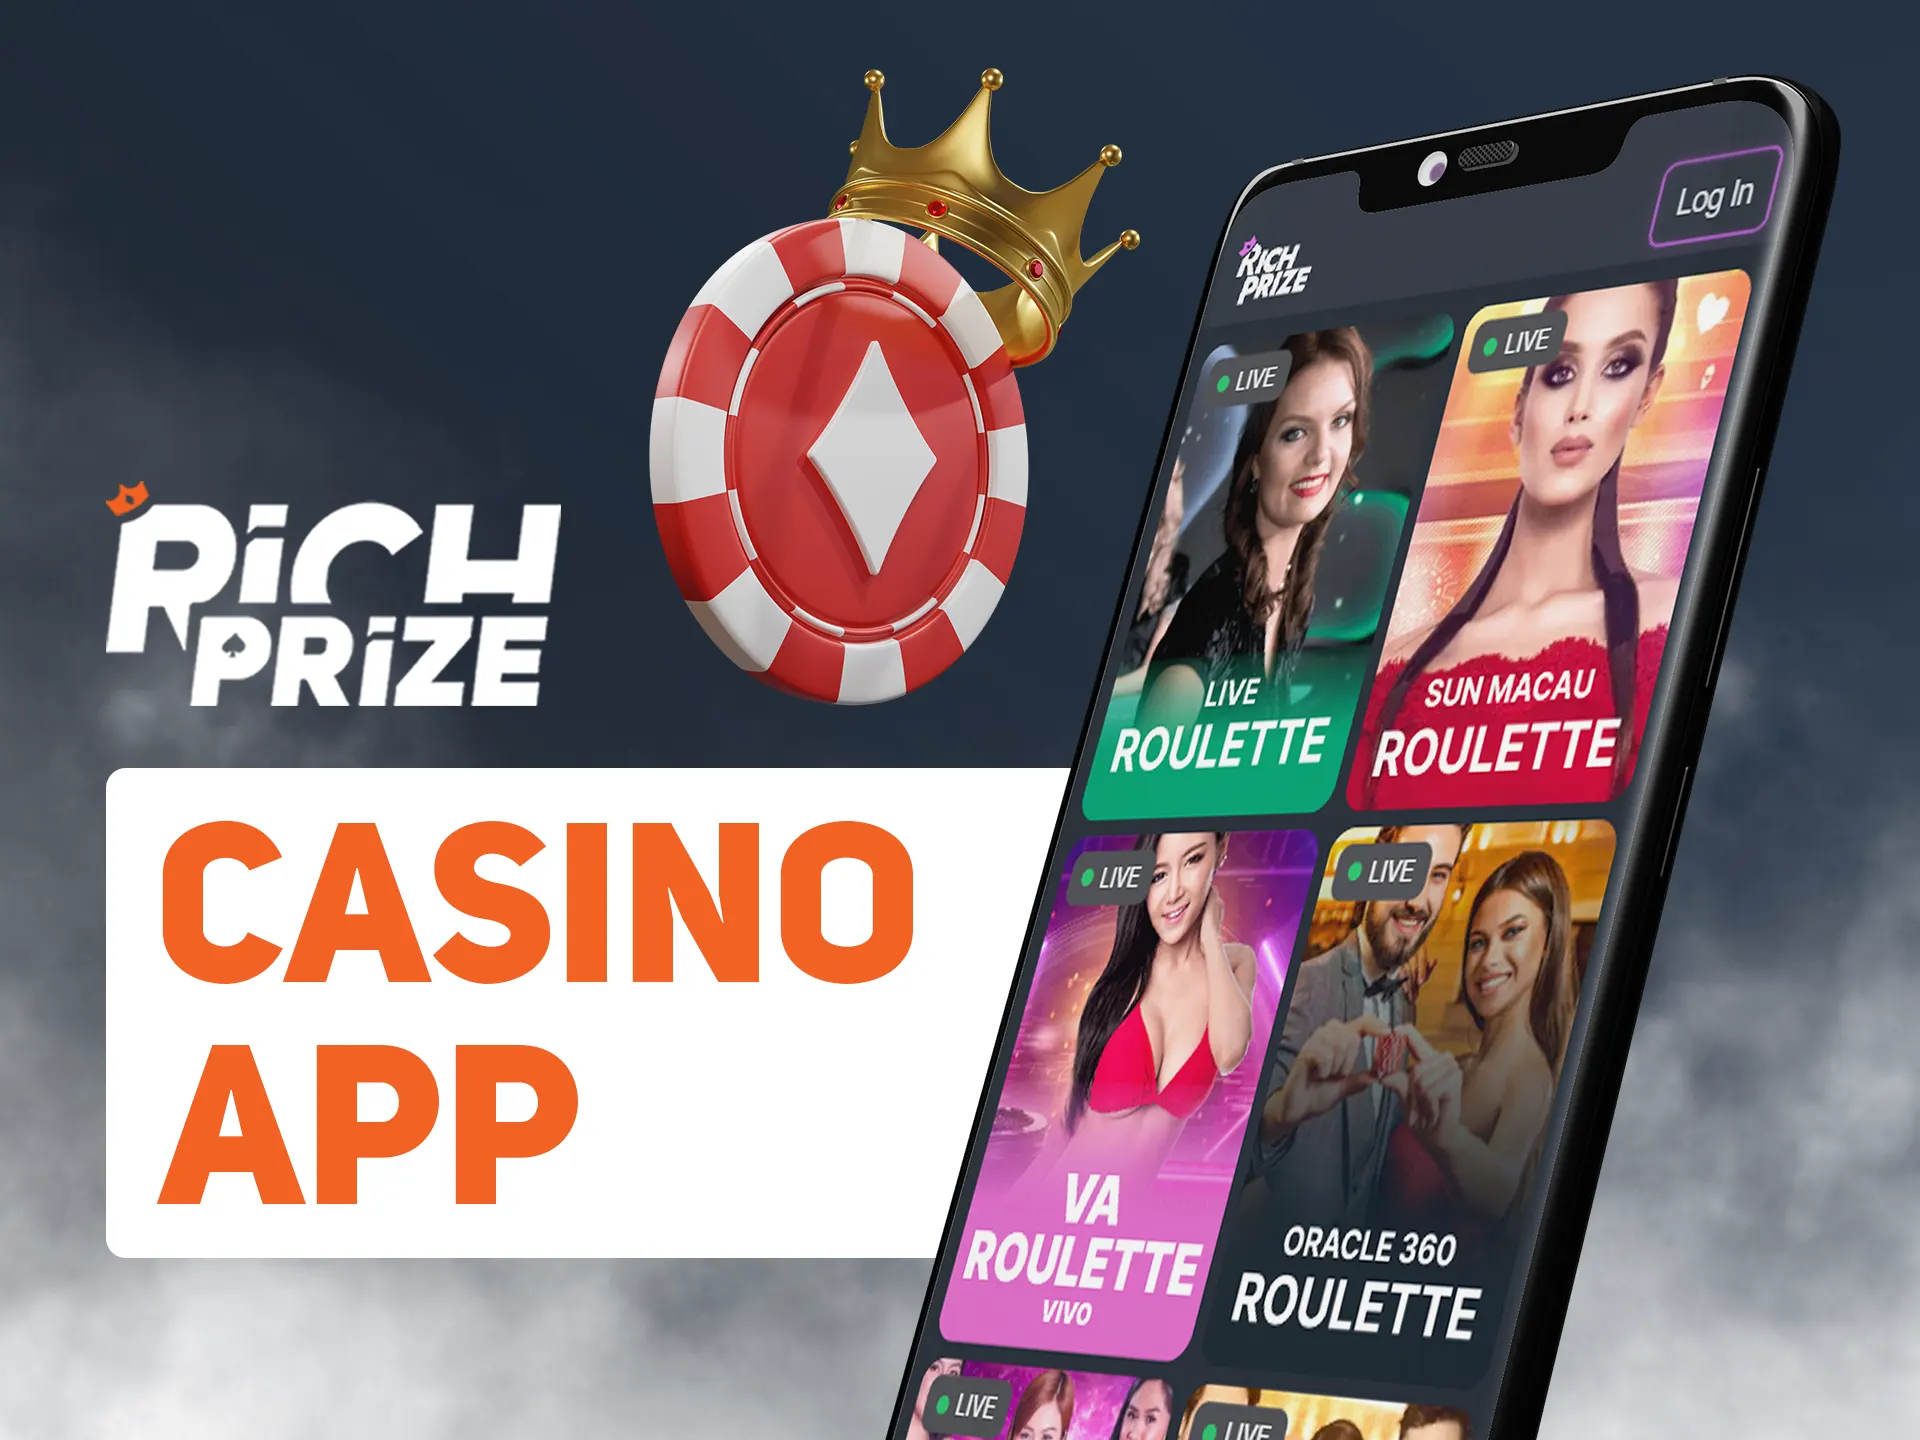 Play casino at any olace using Richprize app.